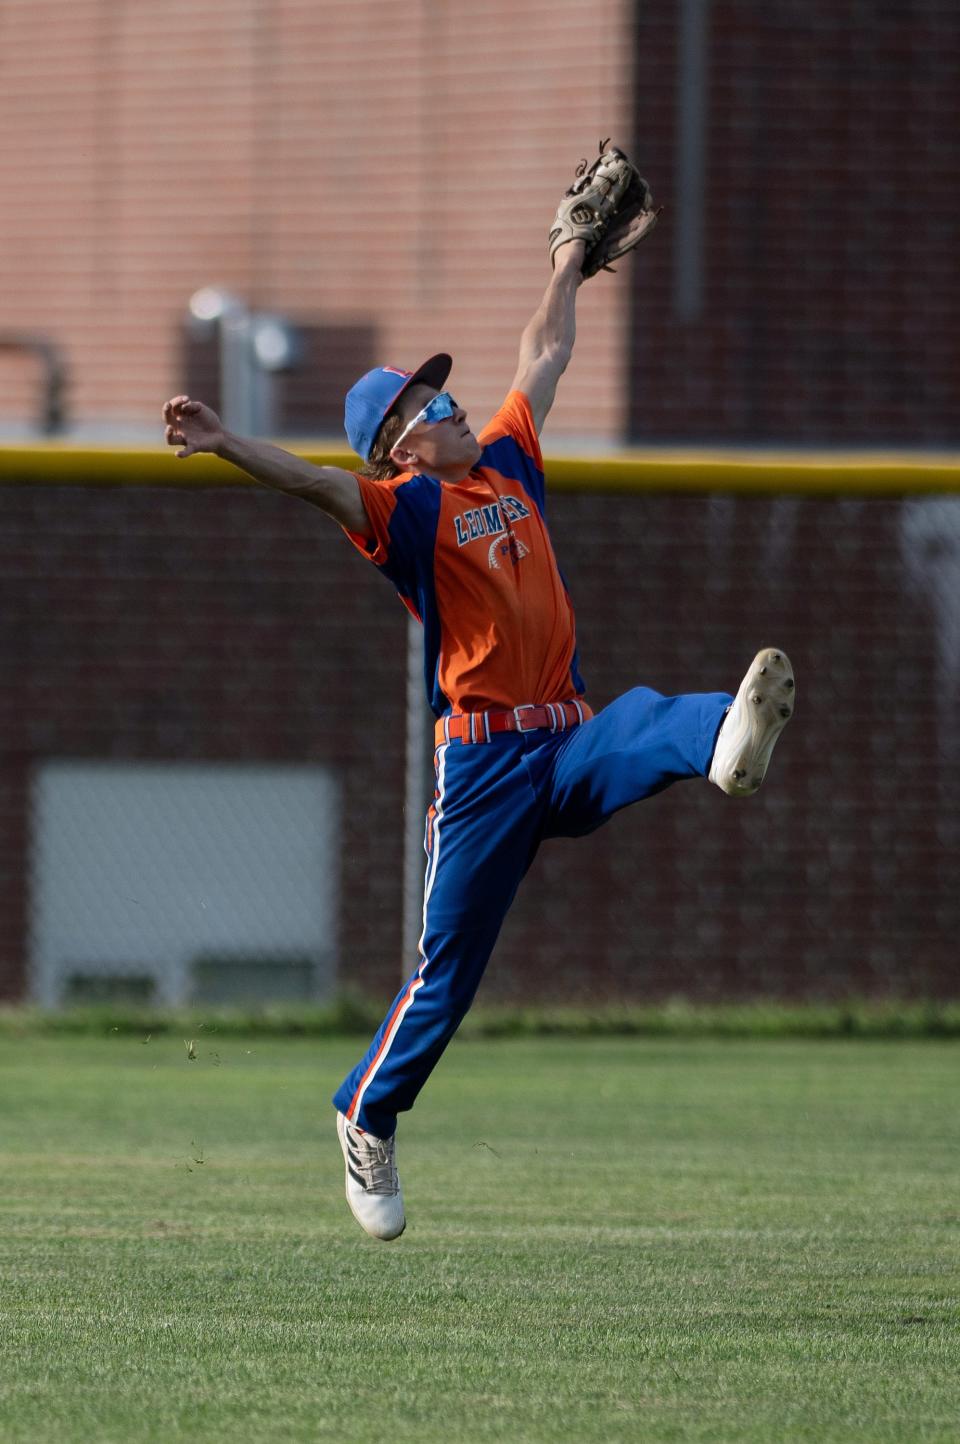 Leominster Post 151's Danny Wright makes a leaping catch in left field versus Hudson Post 100 on Friday.